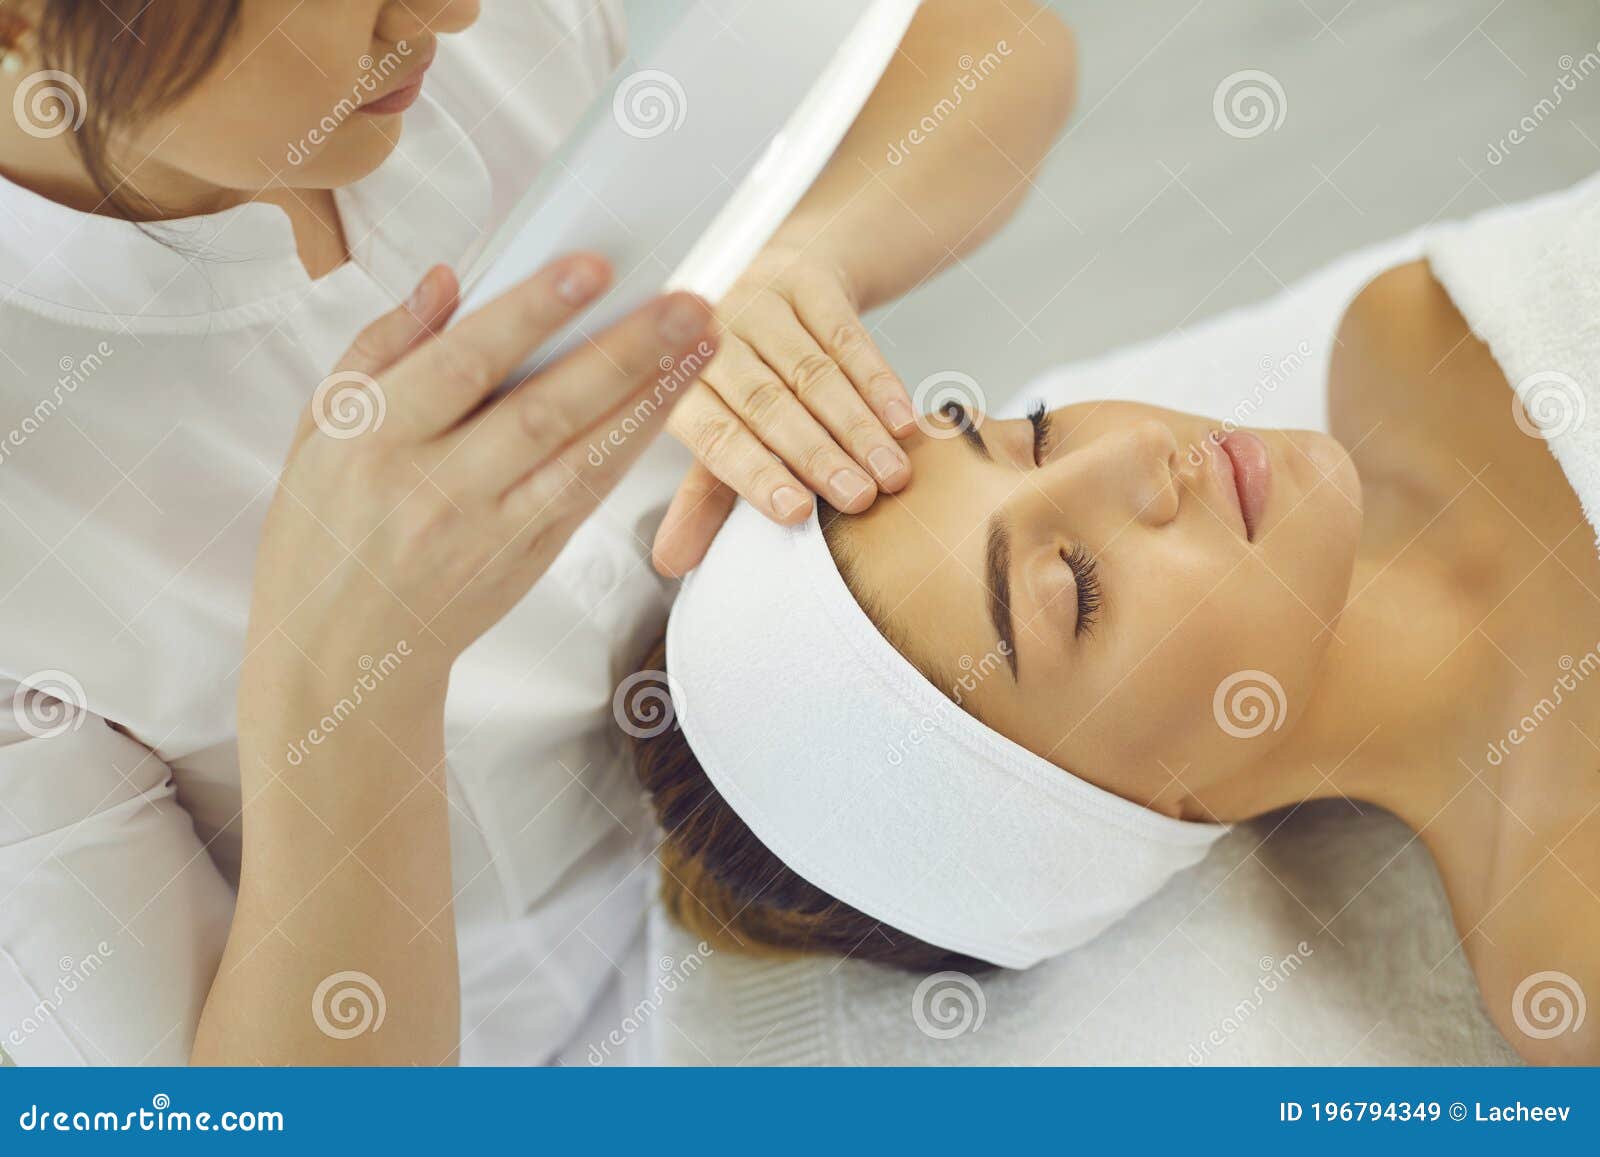 cosmetologist checking skin elasticity and making examination for young relaxing woman